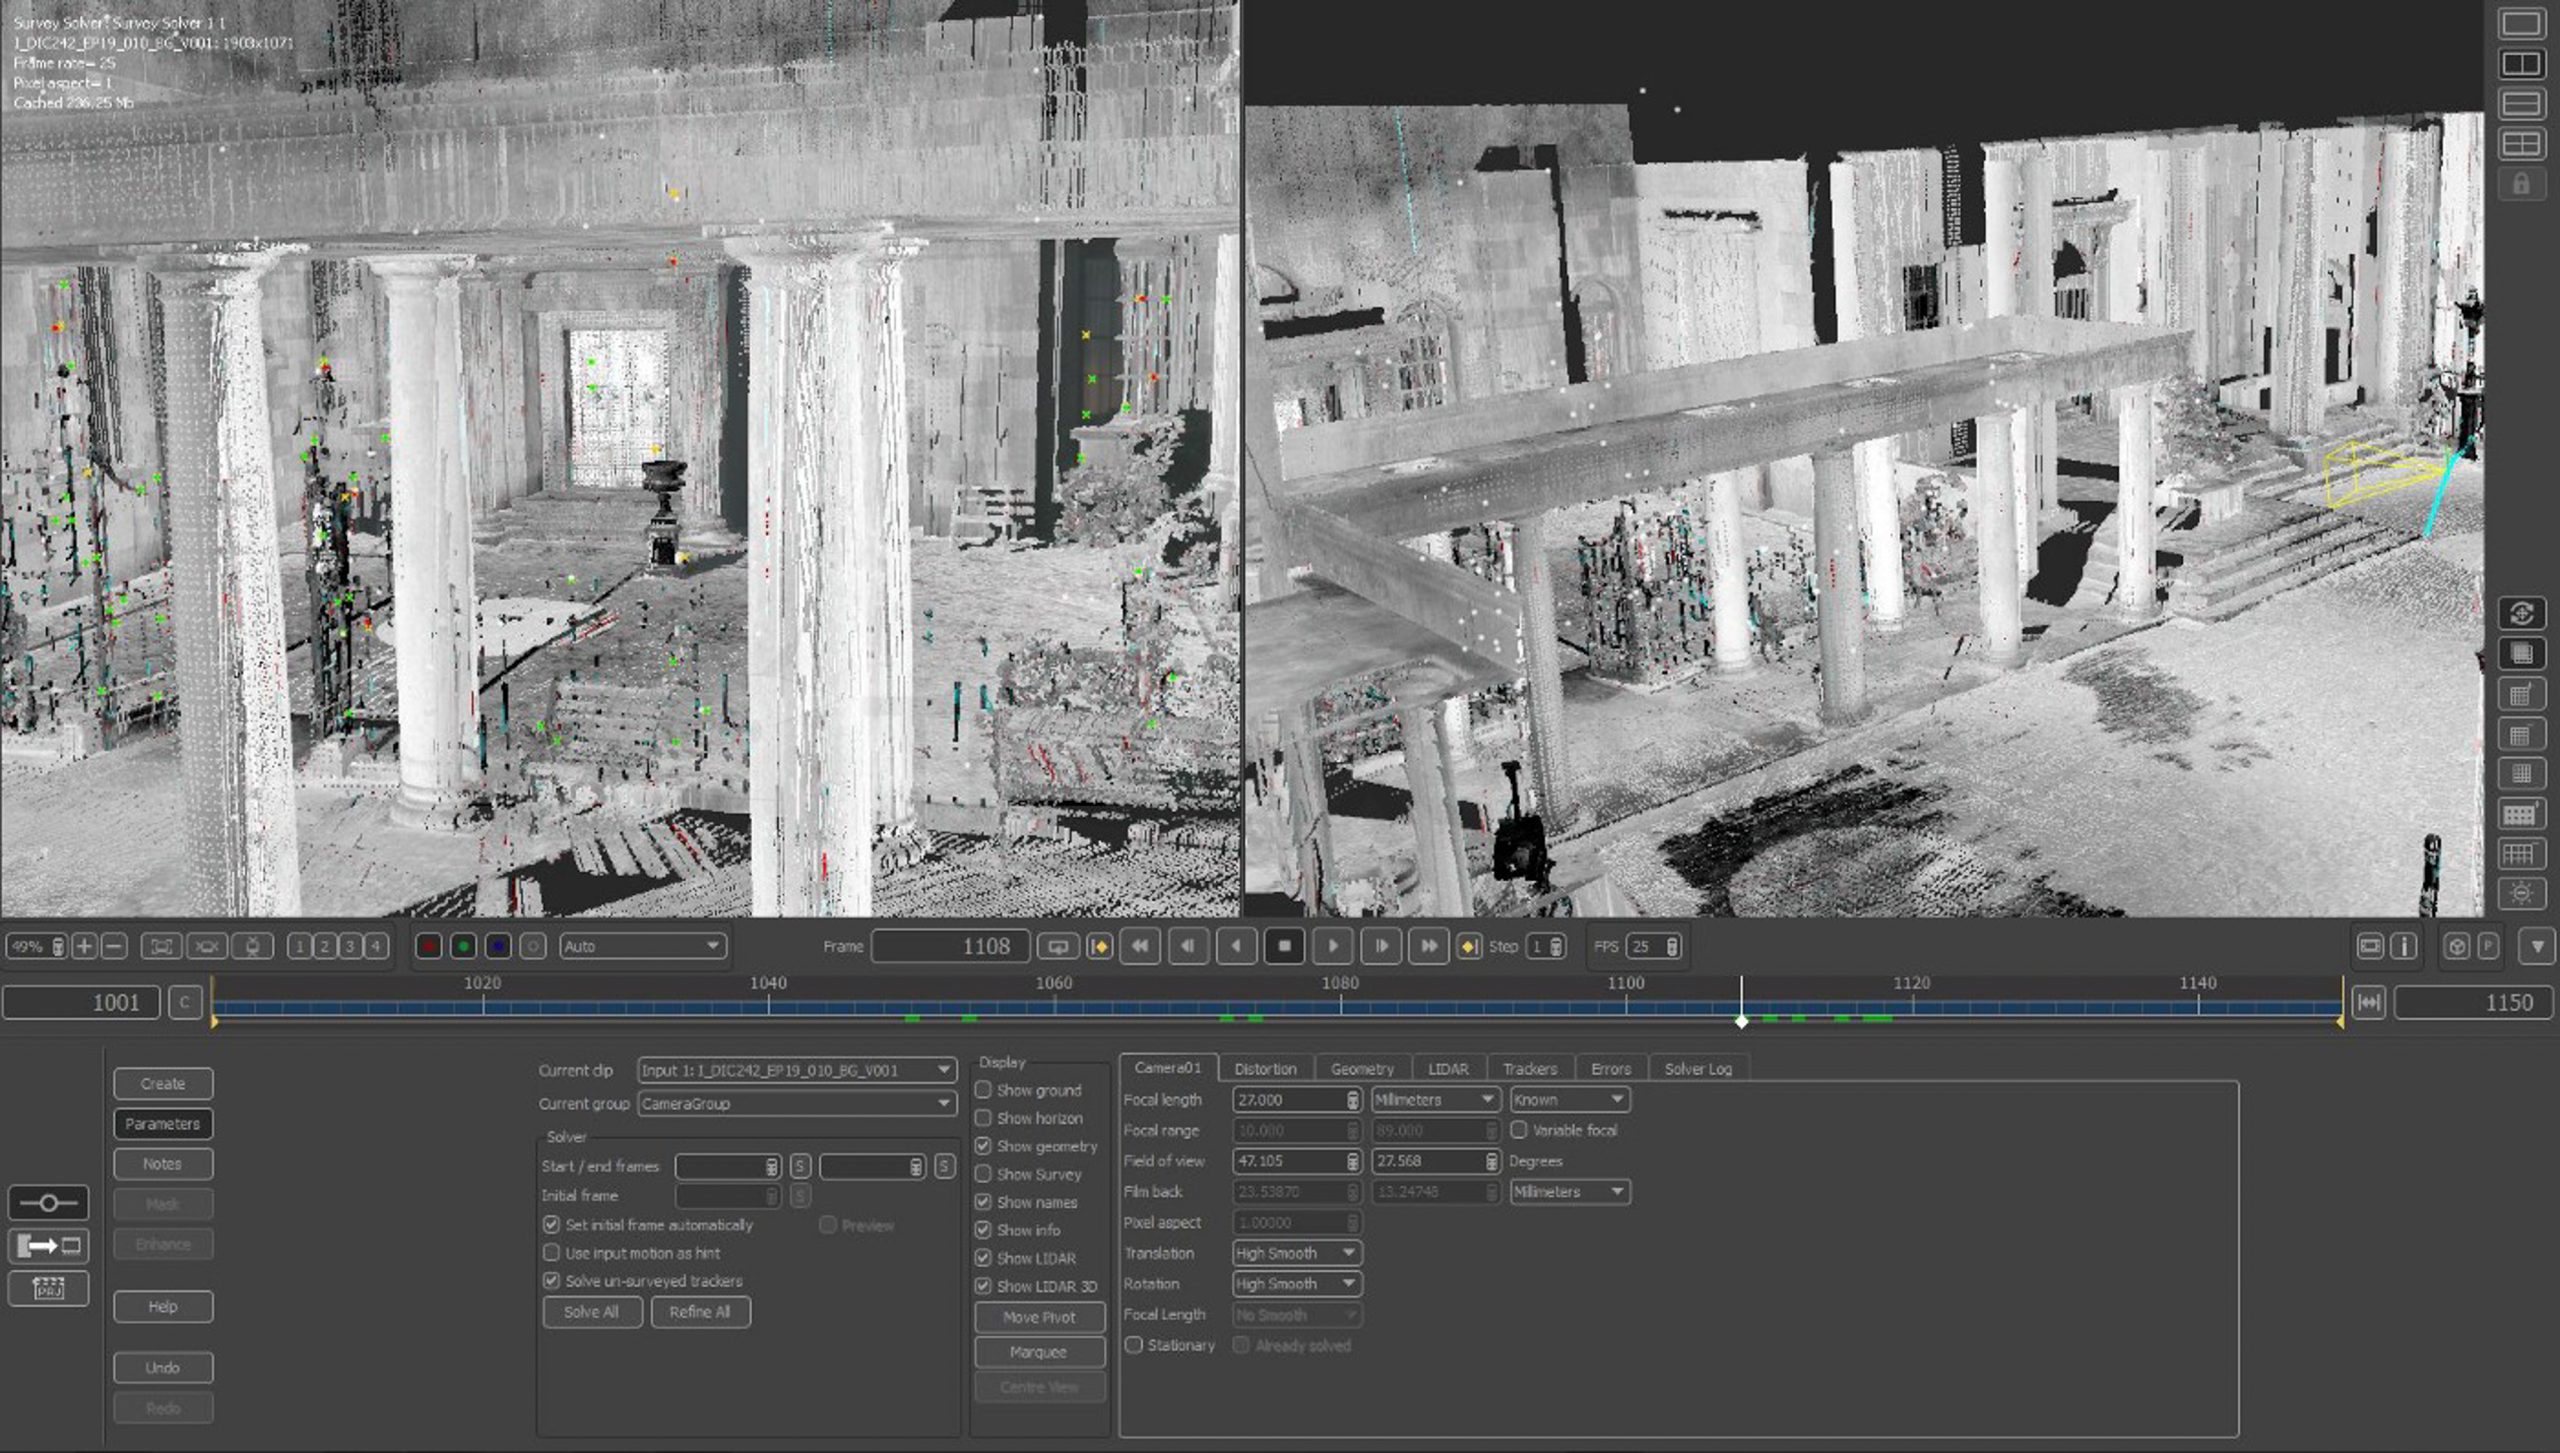 PFTrack interface showing lidar and matched cameras